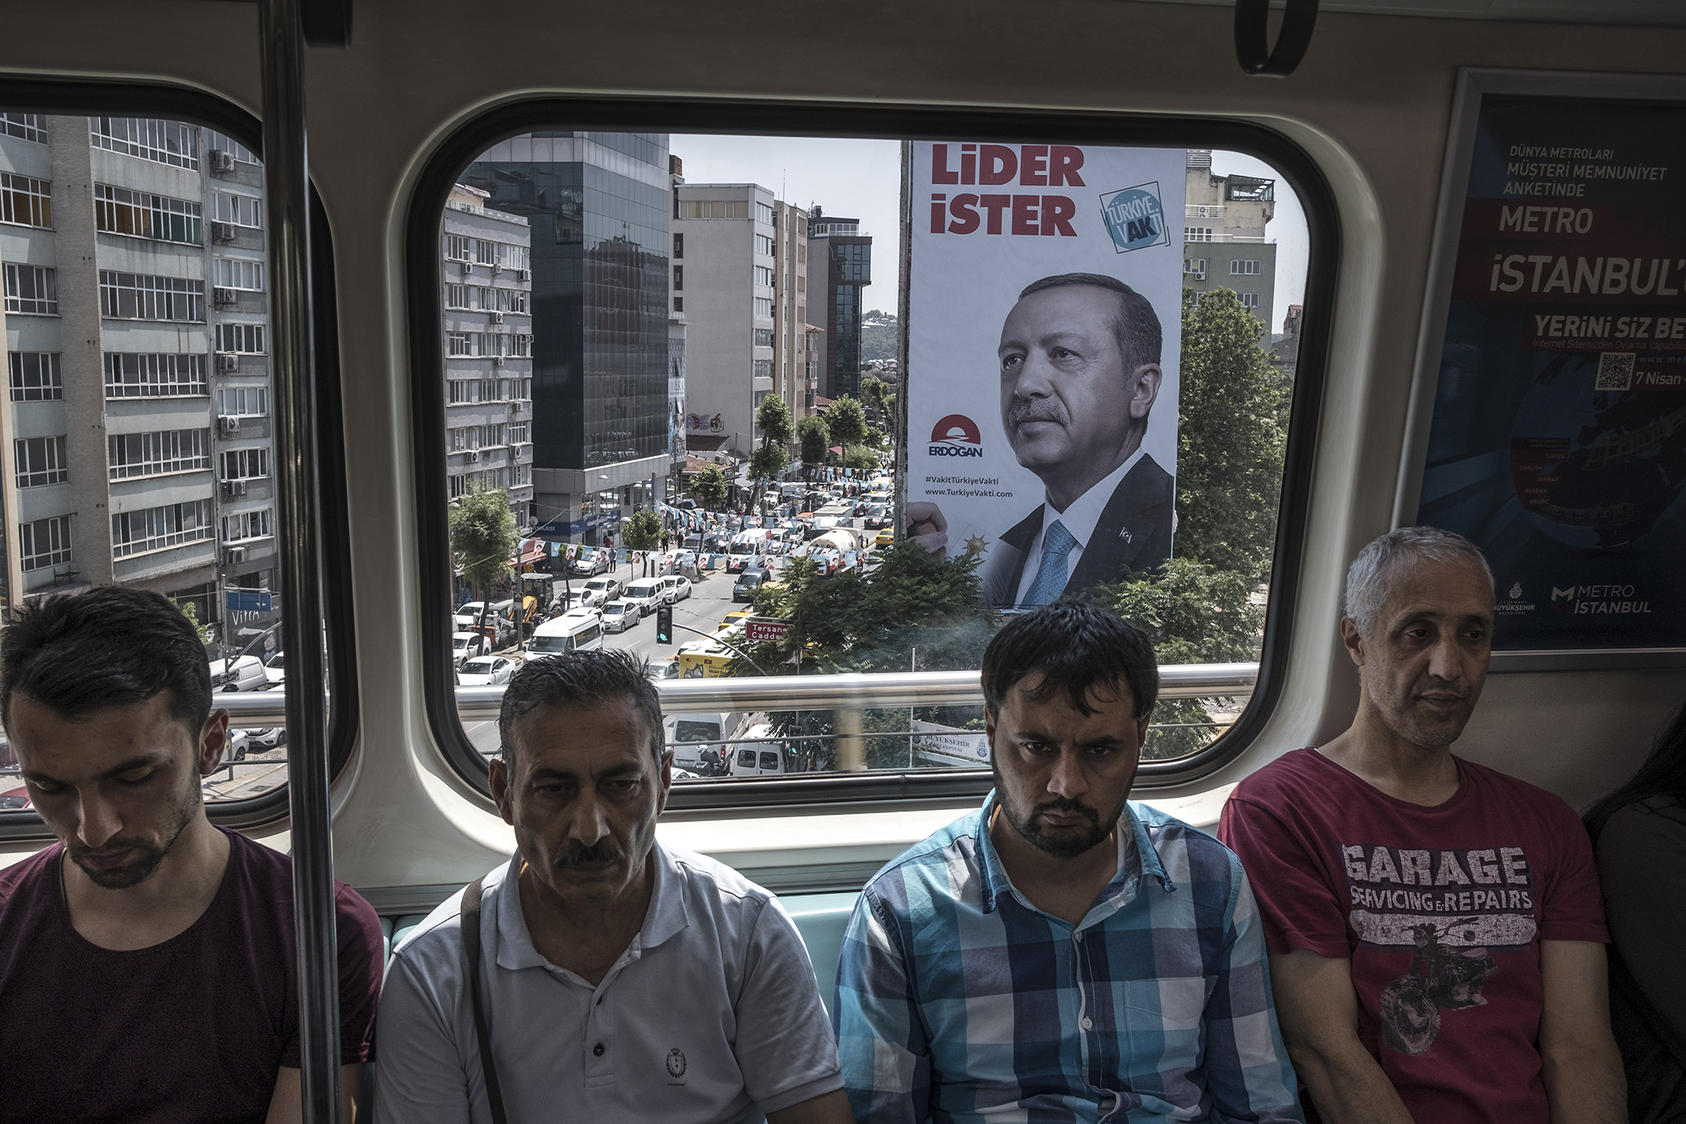 An election poster for President Recep Tayyip Erdogan and Turkey's ruling AK Party on the metro in Istanbul, June 7, 2018. Erdogan uses gargantuan building projects as engines of economic growth and to underline his own strength. (Sergey Ponomarev/The New York Times)